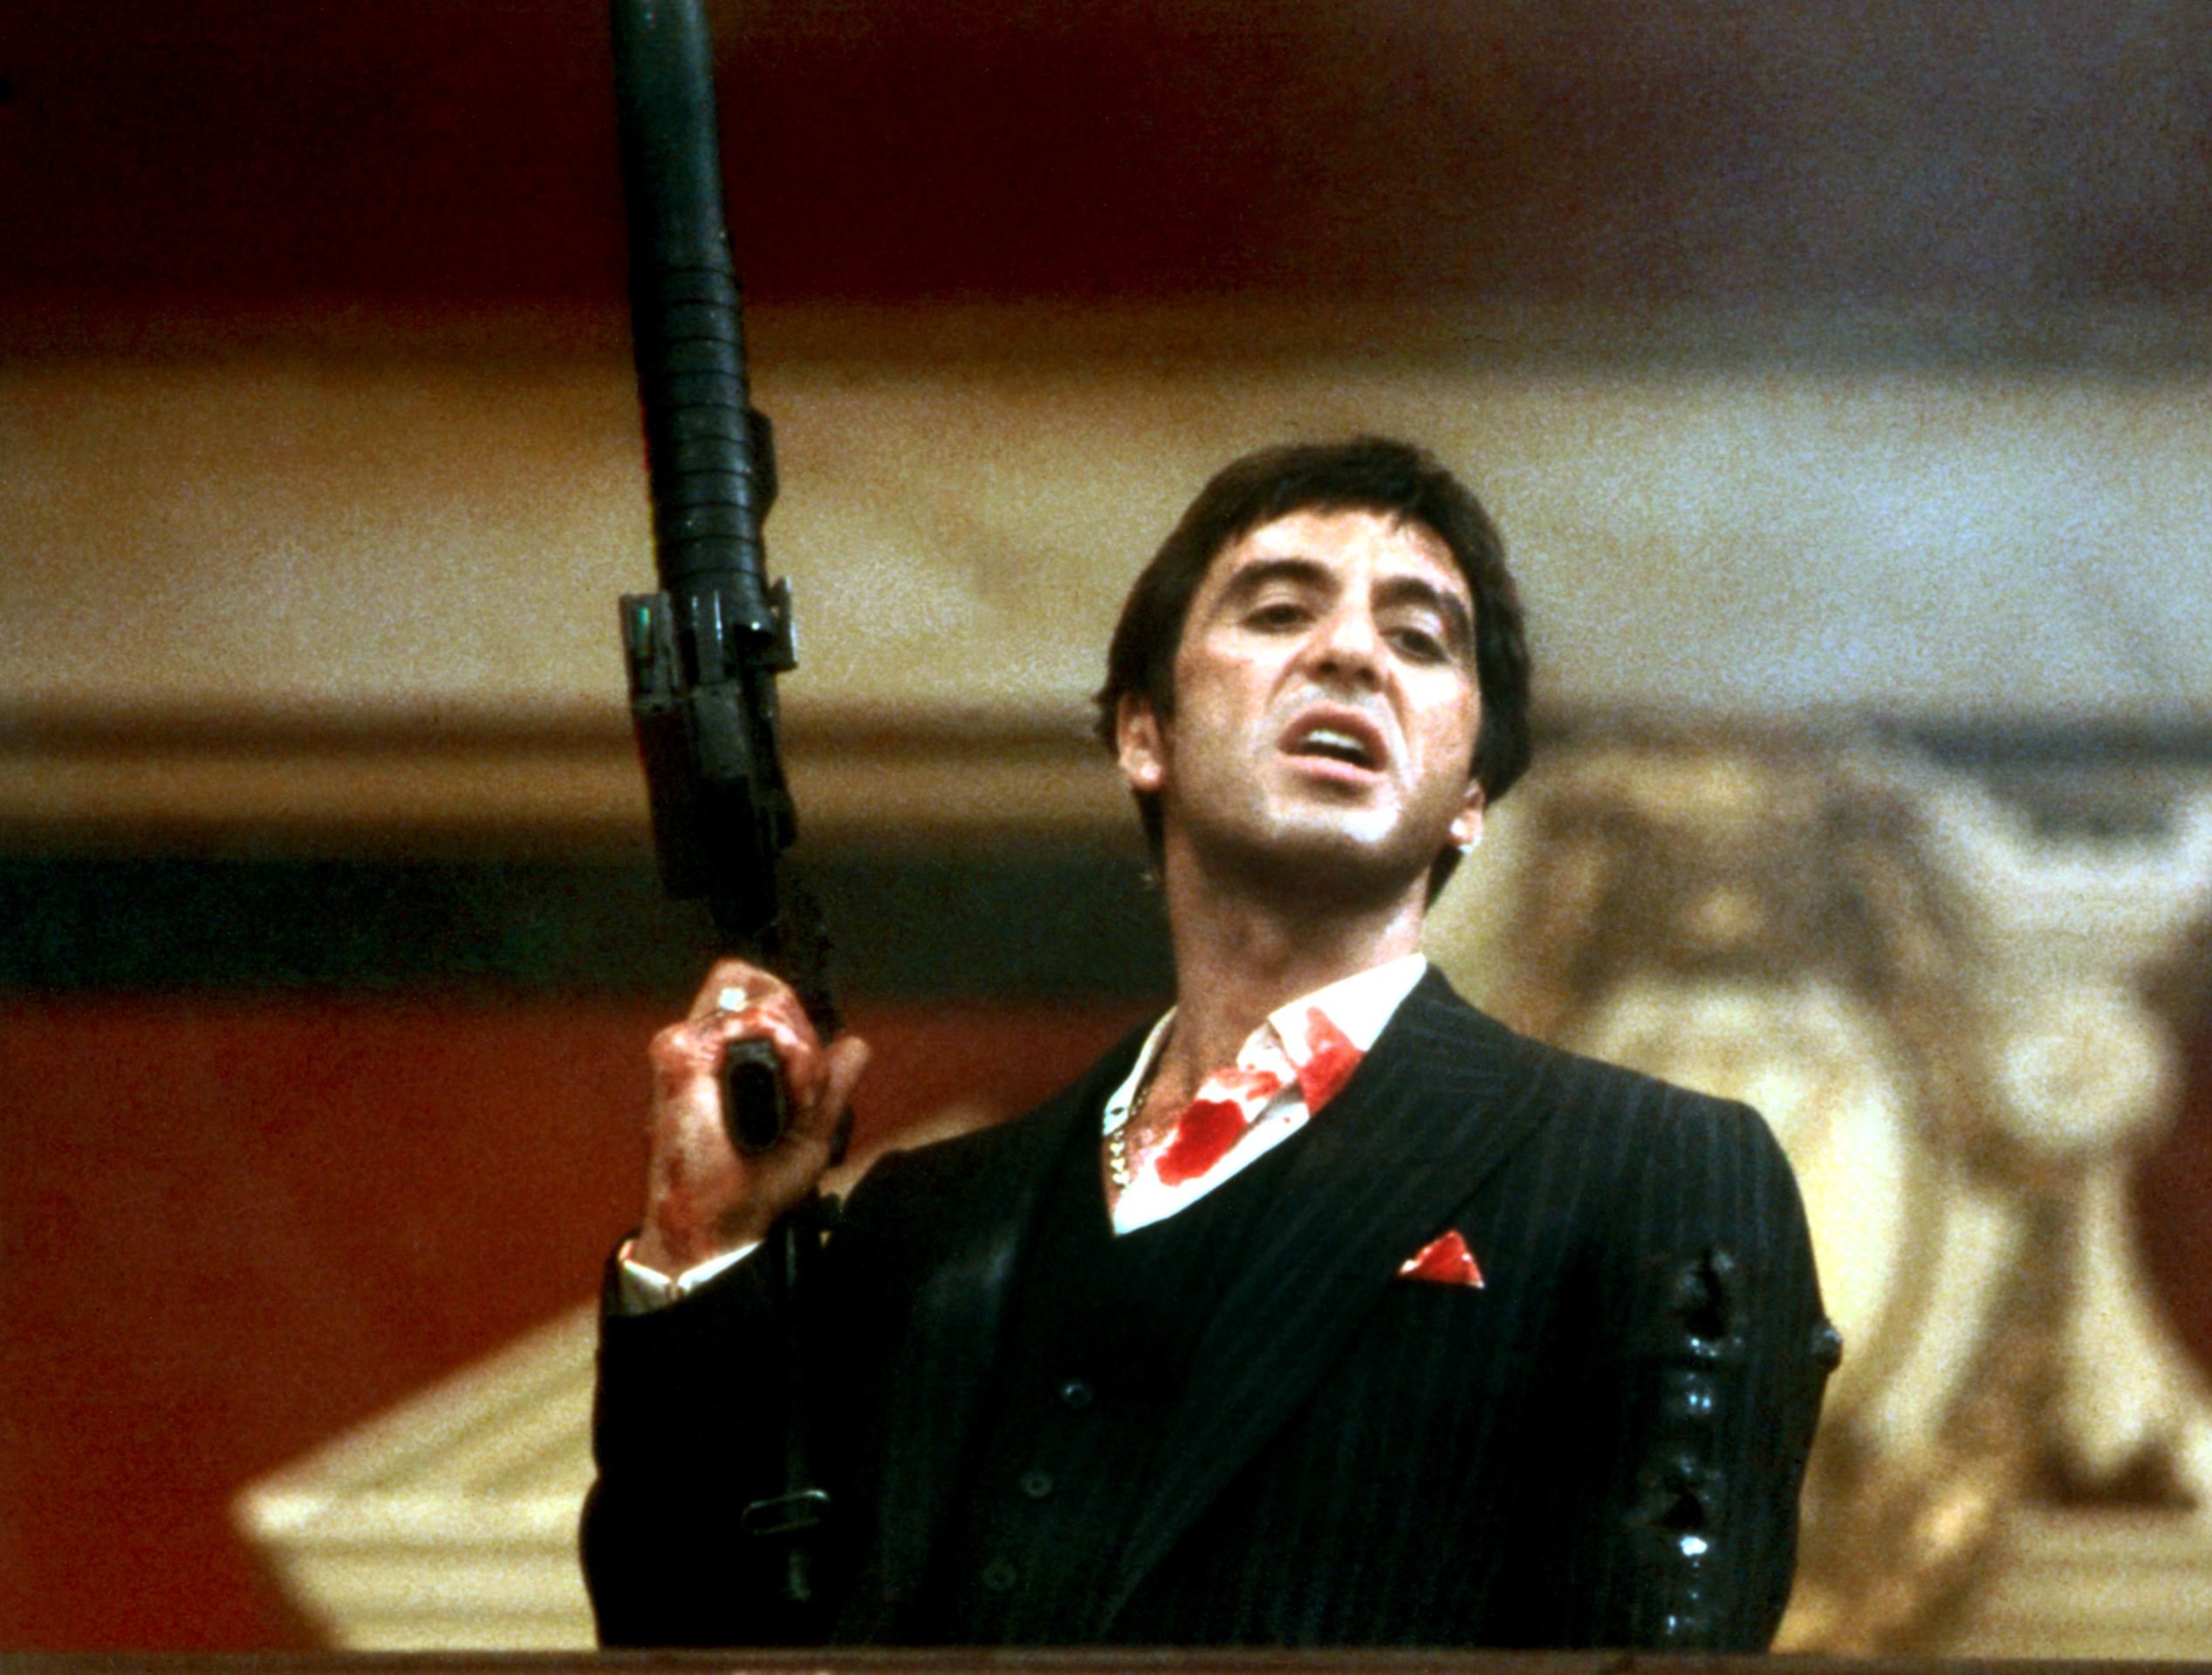 Al Pacino in Scarface, wearing a suit holding a gun with a bloodied face in a movie scene